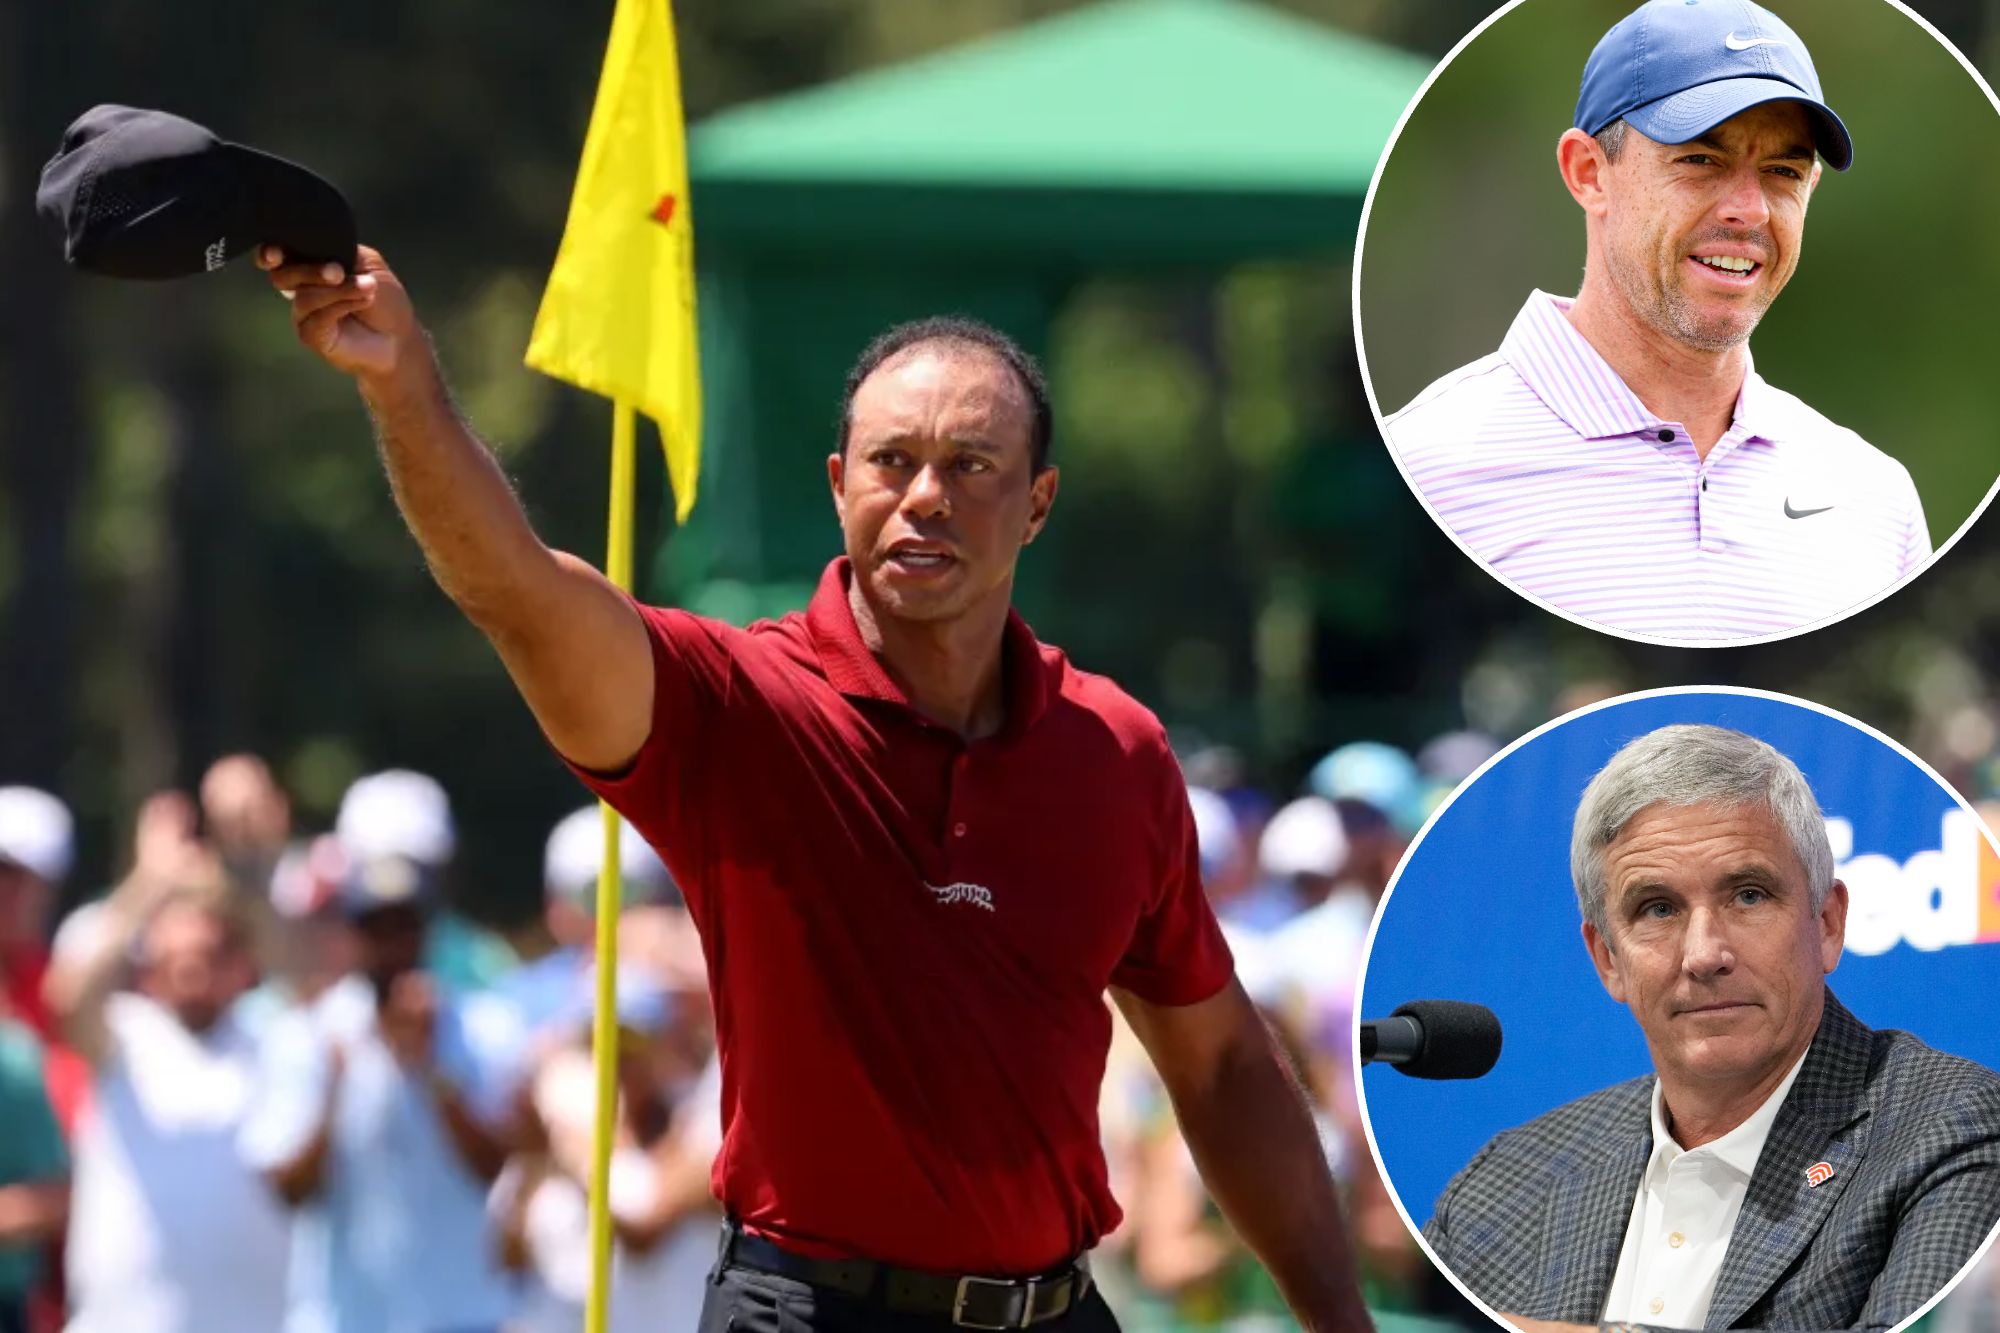 Tiger Woods and Rory McIlroy are getting the biggest PGA Tour paydays.